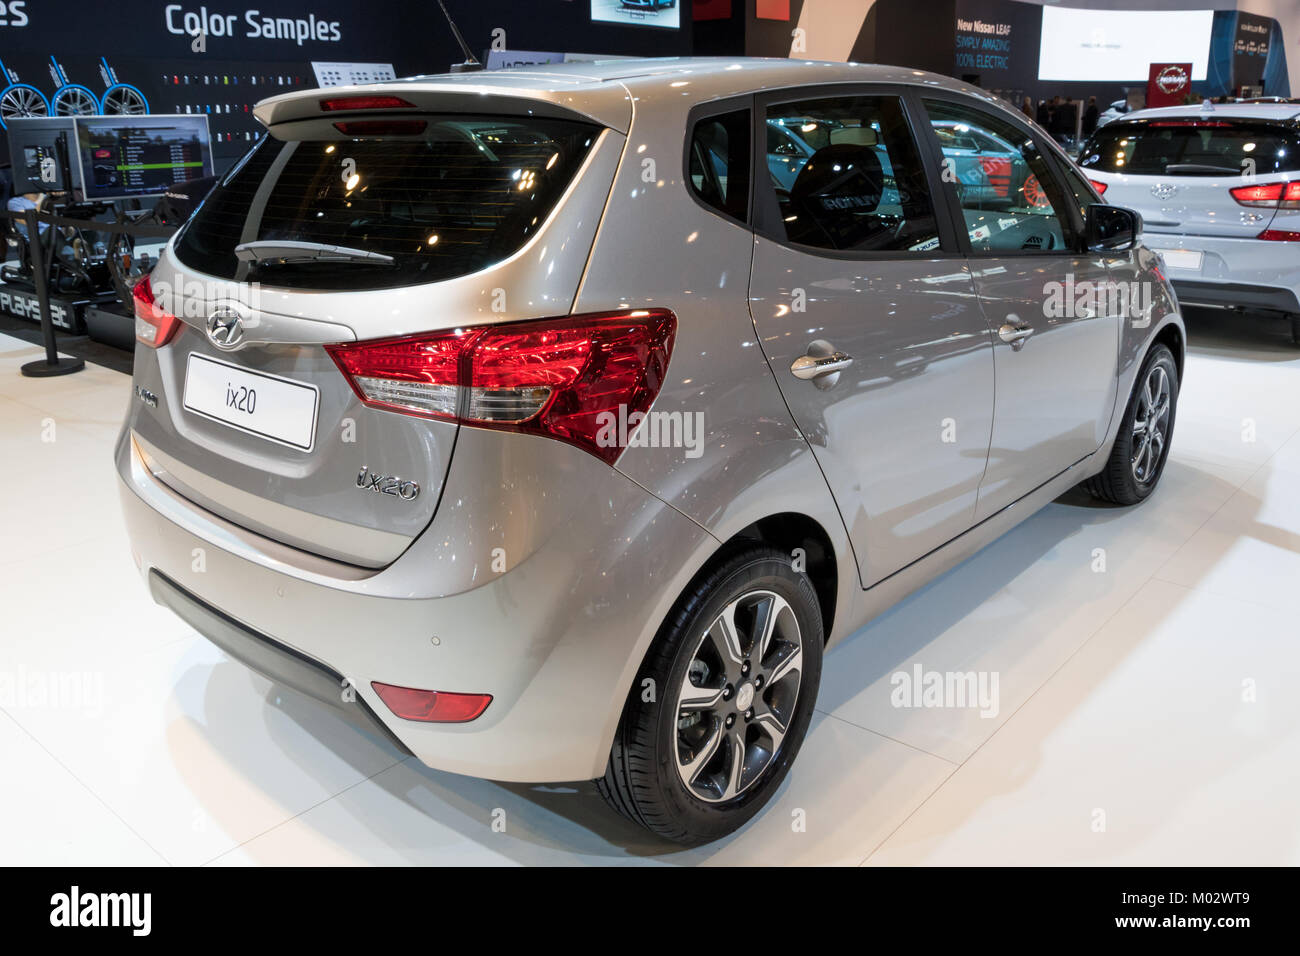 BRUSSELS - JAN 10, 2018: Hyundai ix20 compact MPV car showcased at the Brussels Motor Show. Stock Photo